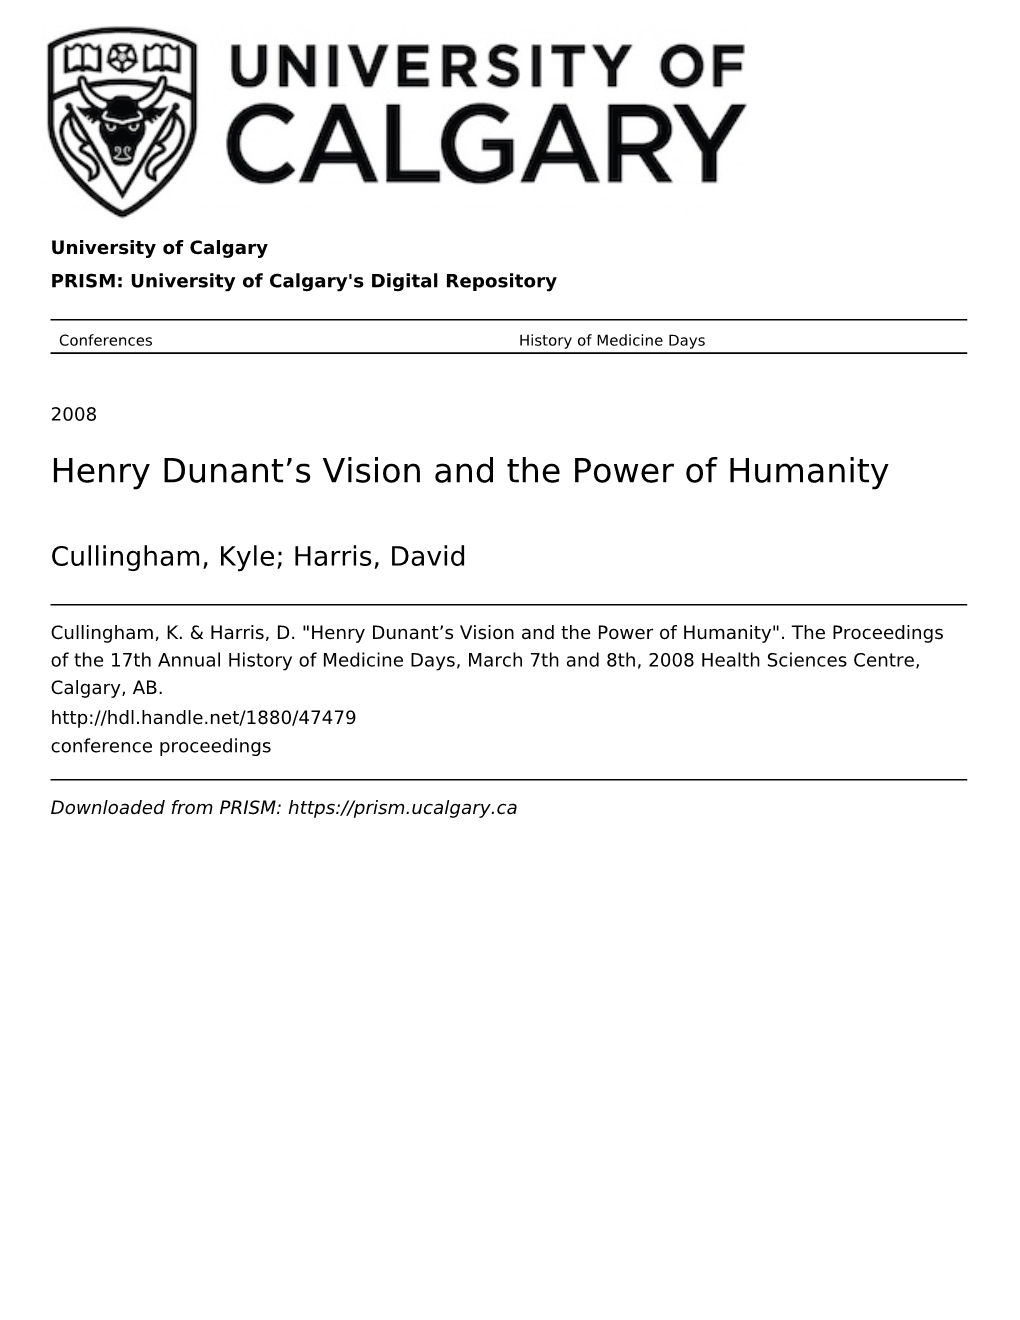 Henry Dunant's Vision and the Power of Humanity